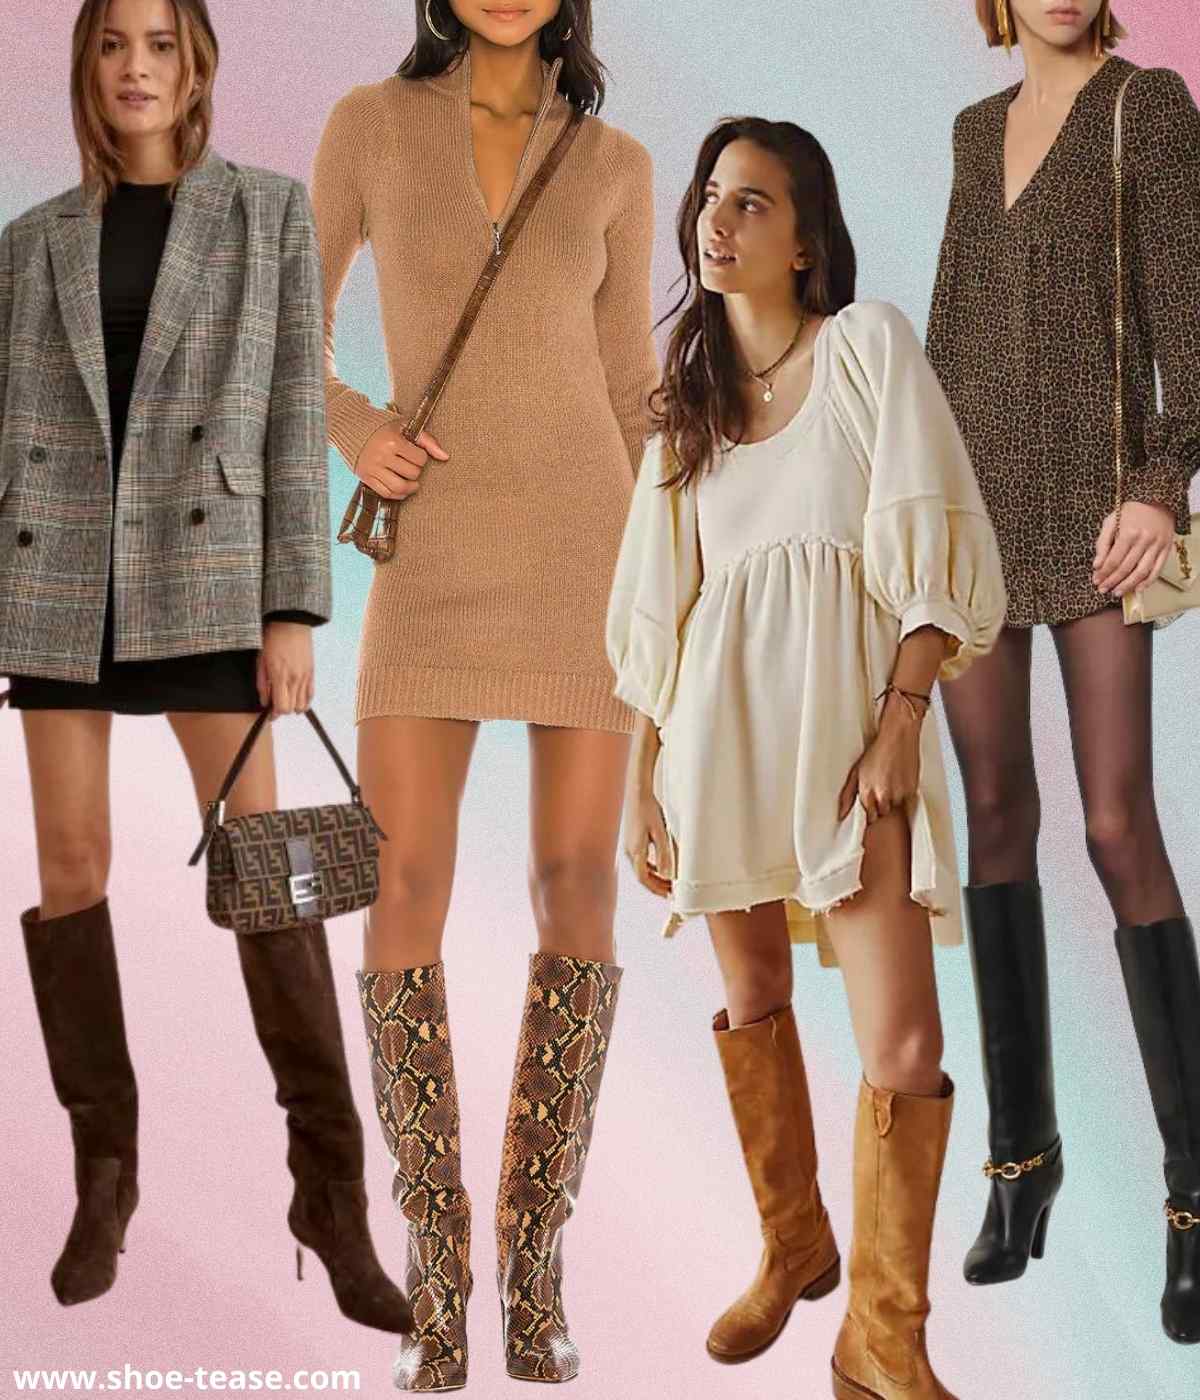 4 women wearing different mini dresses with knee boots.